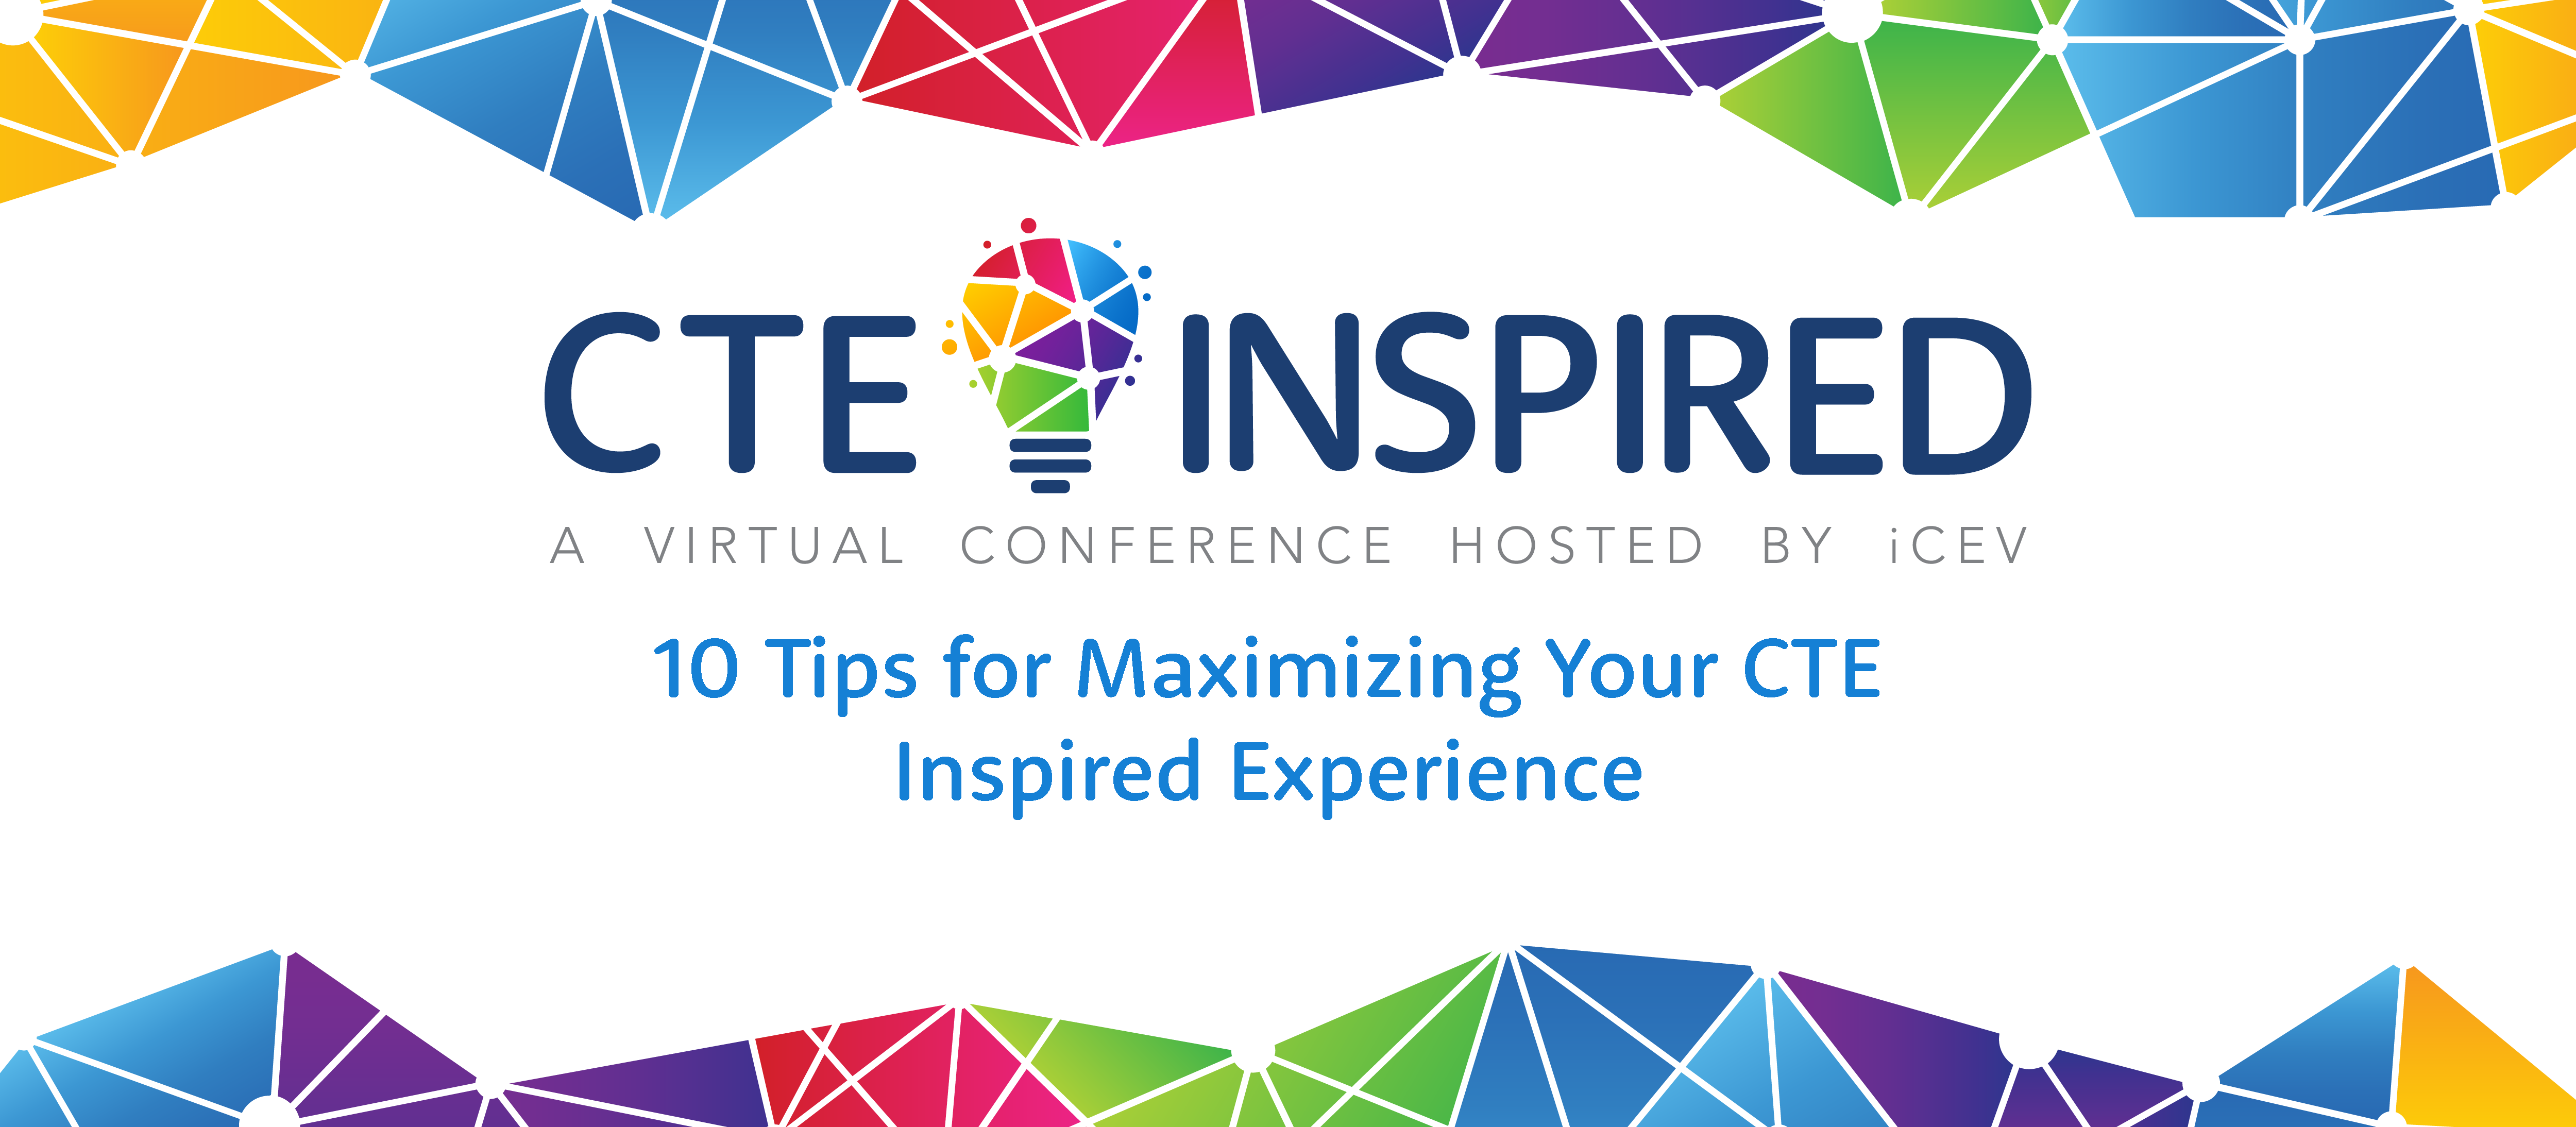 iCEV hosts its first-ever virtual conference, CTE Inspired. 